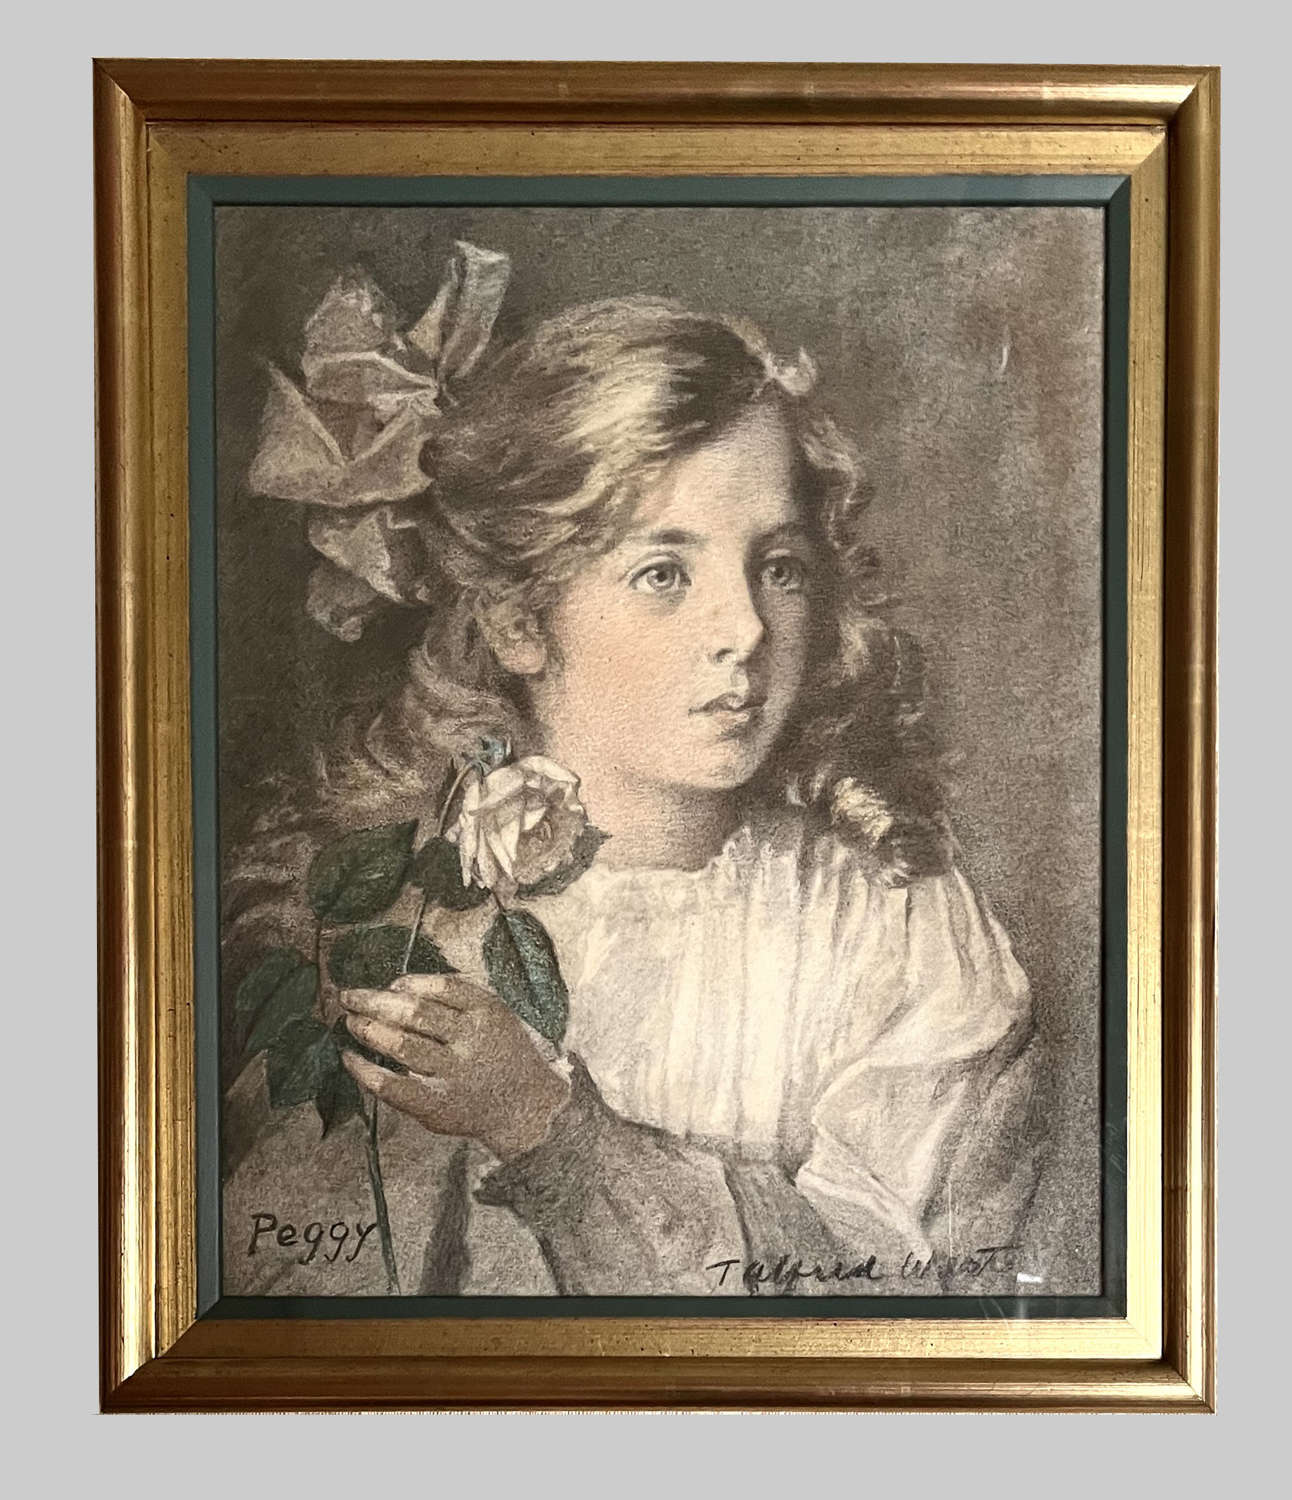 Studio pastel and watercolour portrait of Peggy by T.Alfred West